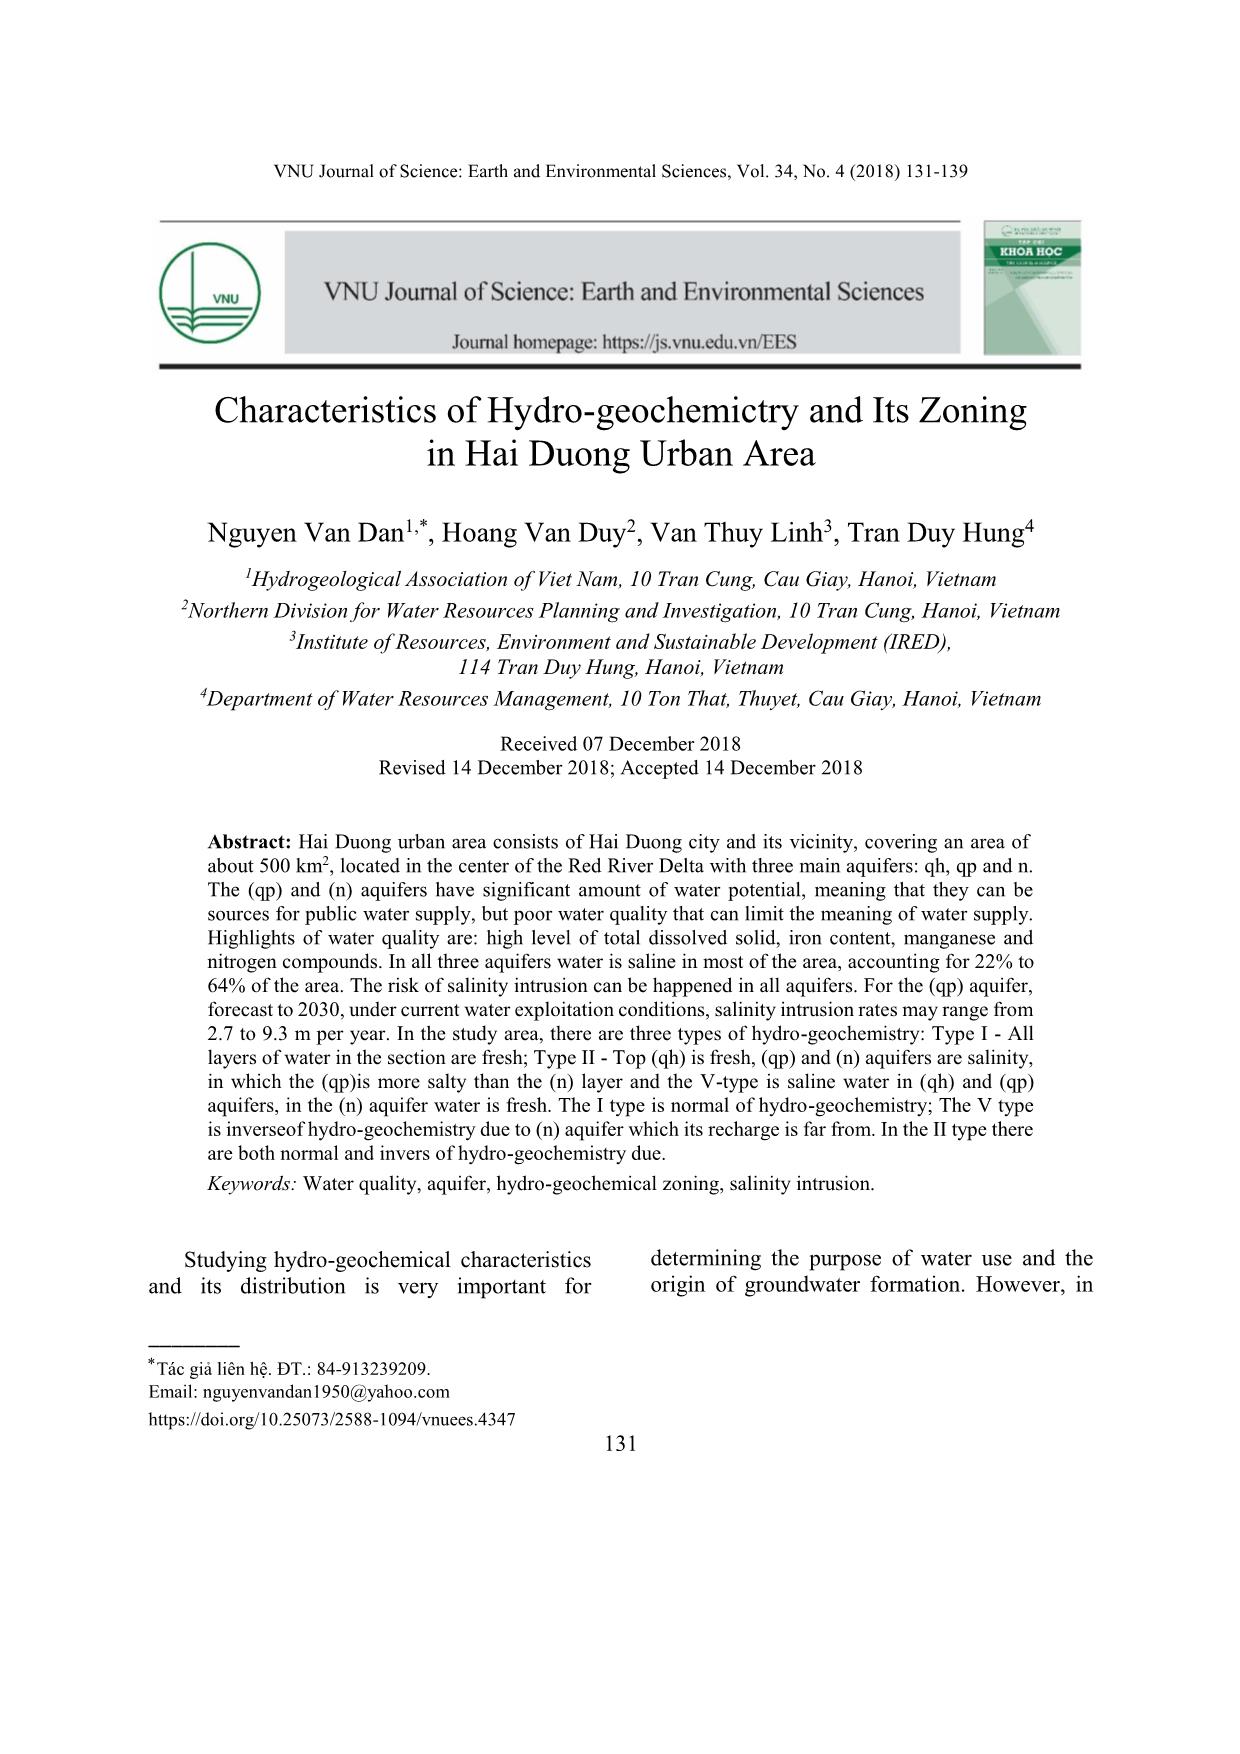 Characteristics of Hydro-Geochemictry and Its Zoning in Hai Duong Urban Area trang 1